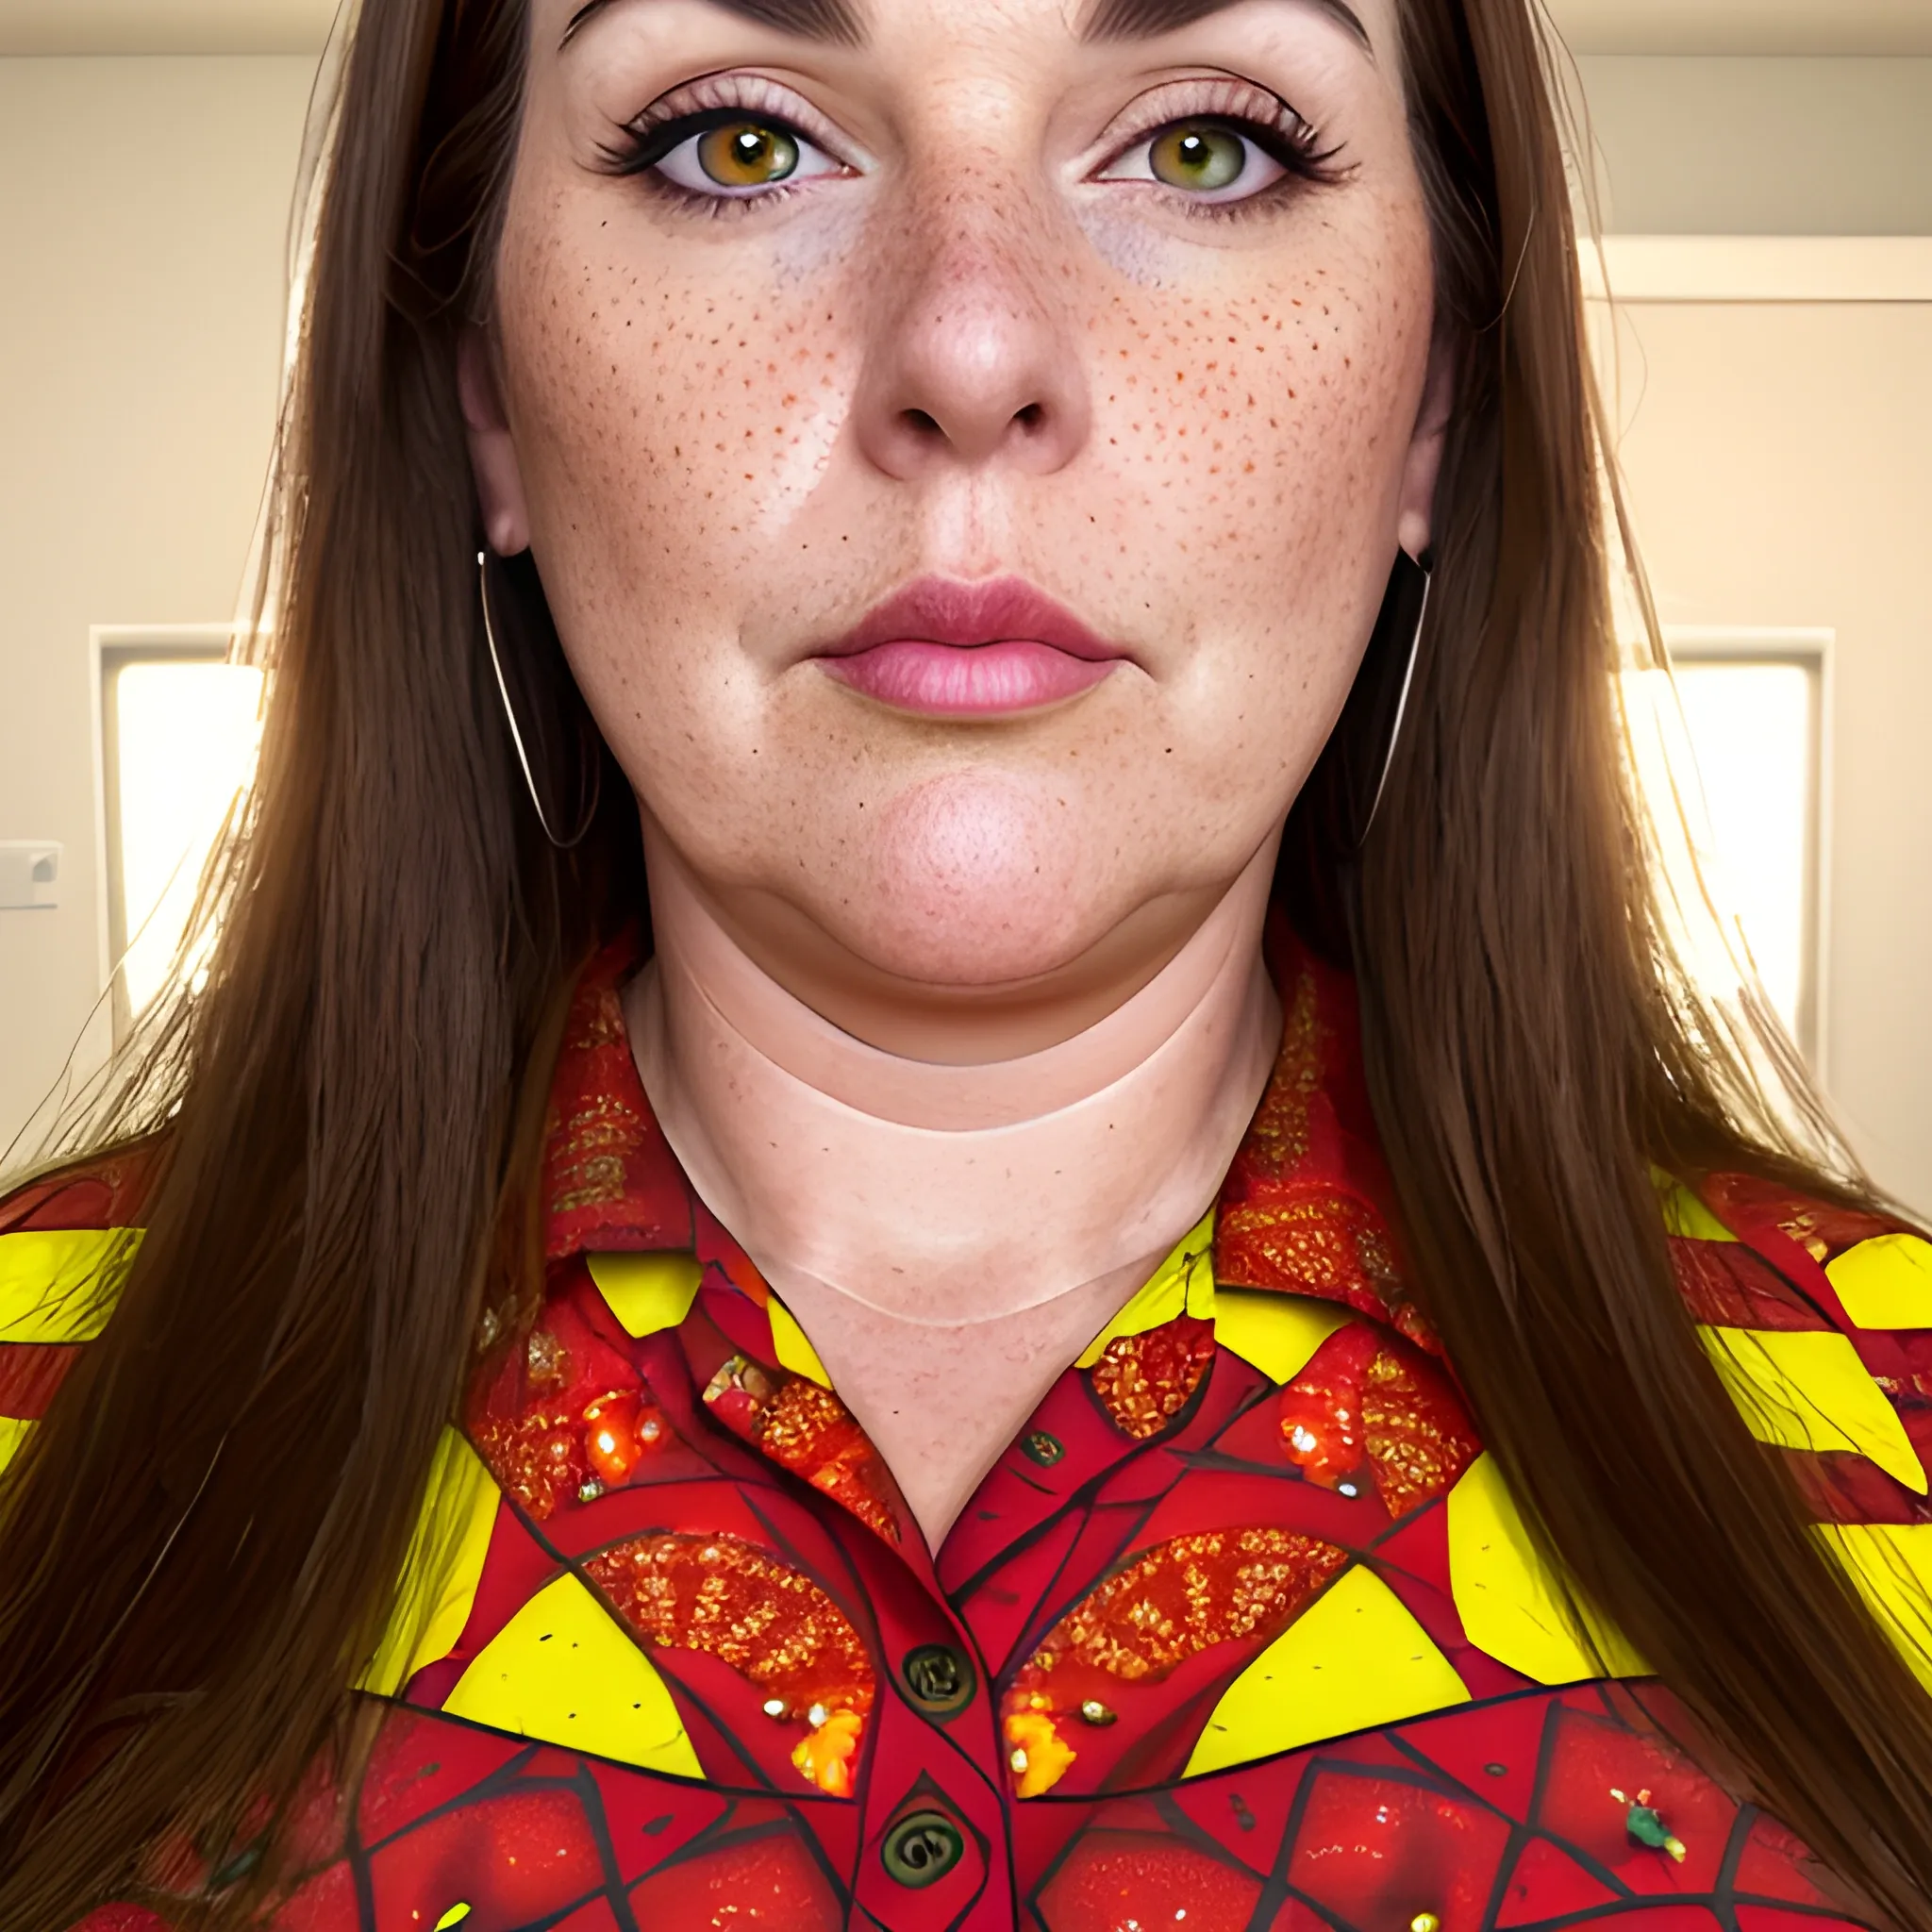 Tall beautiful plus sized, ample, middle-aged  American Woman, long straight brown hair, full lips, full face, freckles, fitted red and yellow patterned shirt, looking down at the camera, up close pov, detailed, warm lighting 